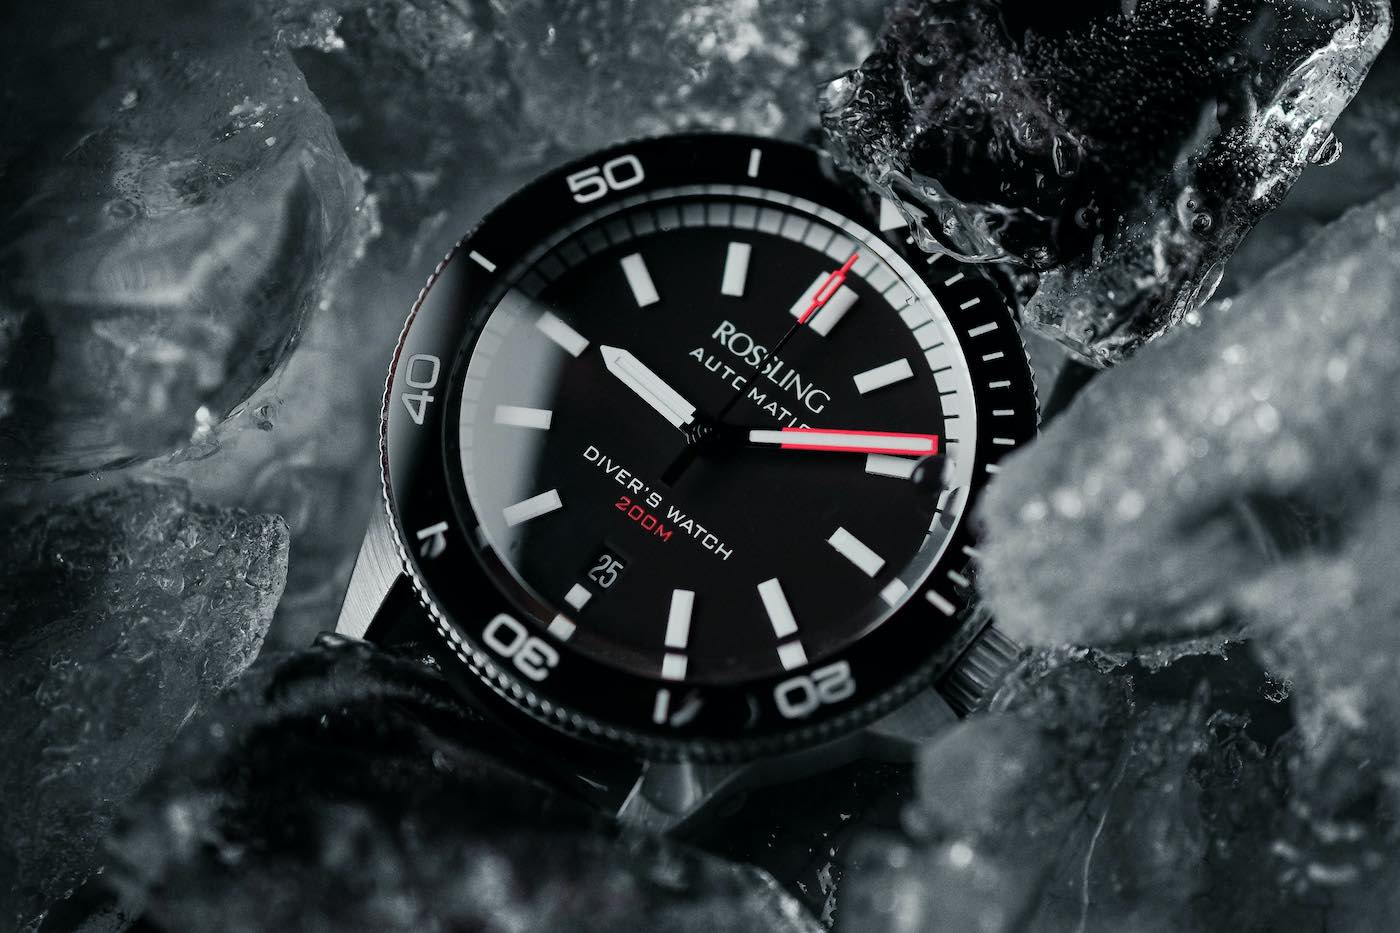 Rossling Hydromatic C.01 Watch Meets ISO 6425 Standards